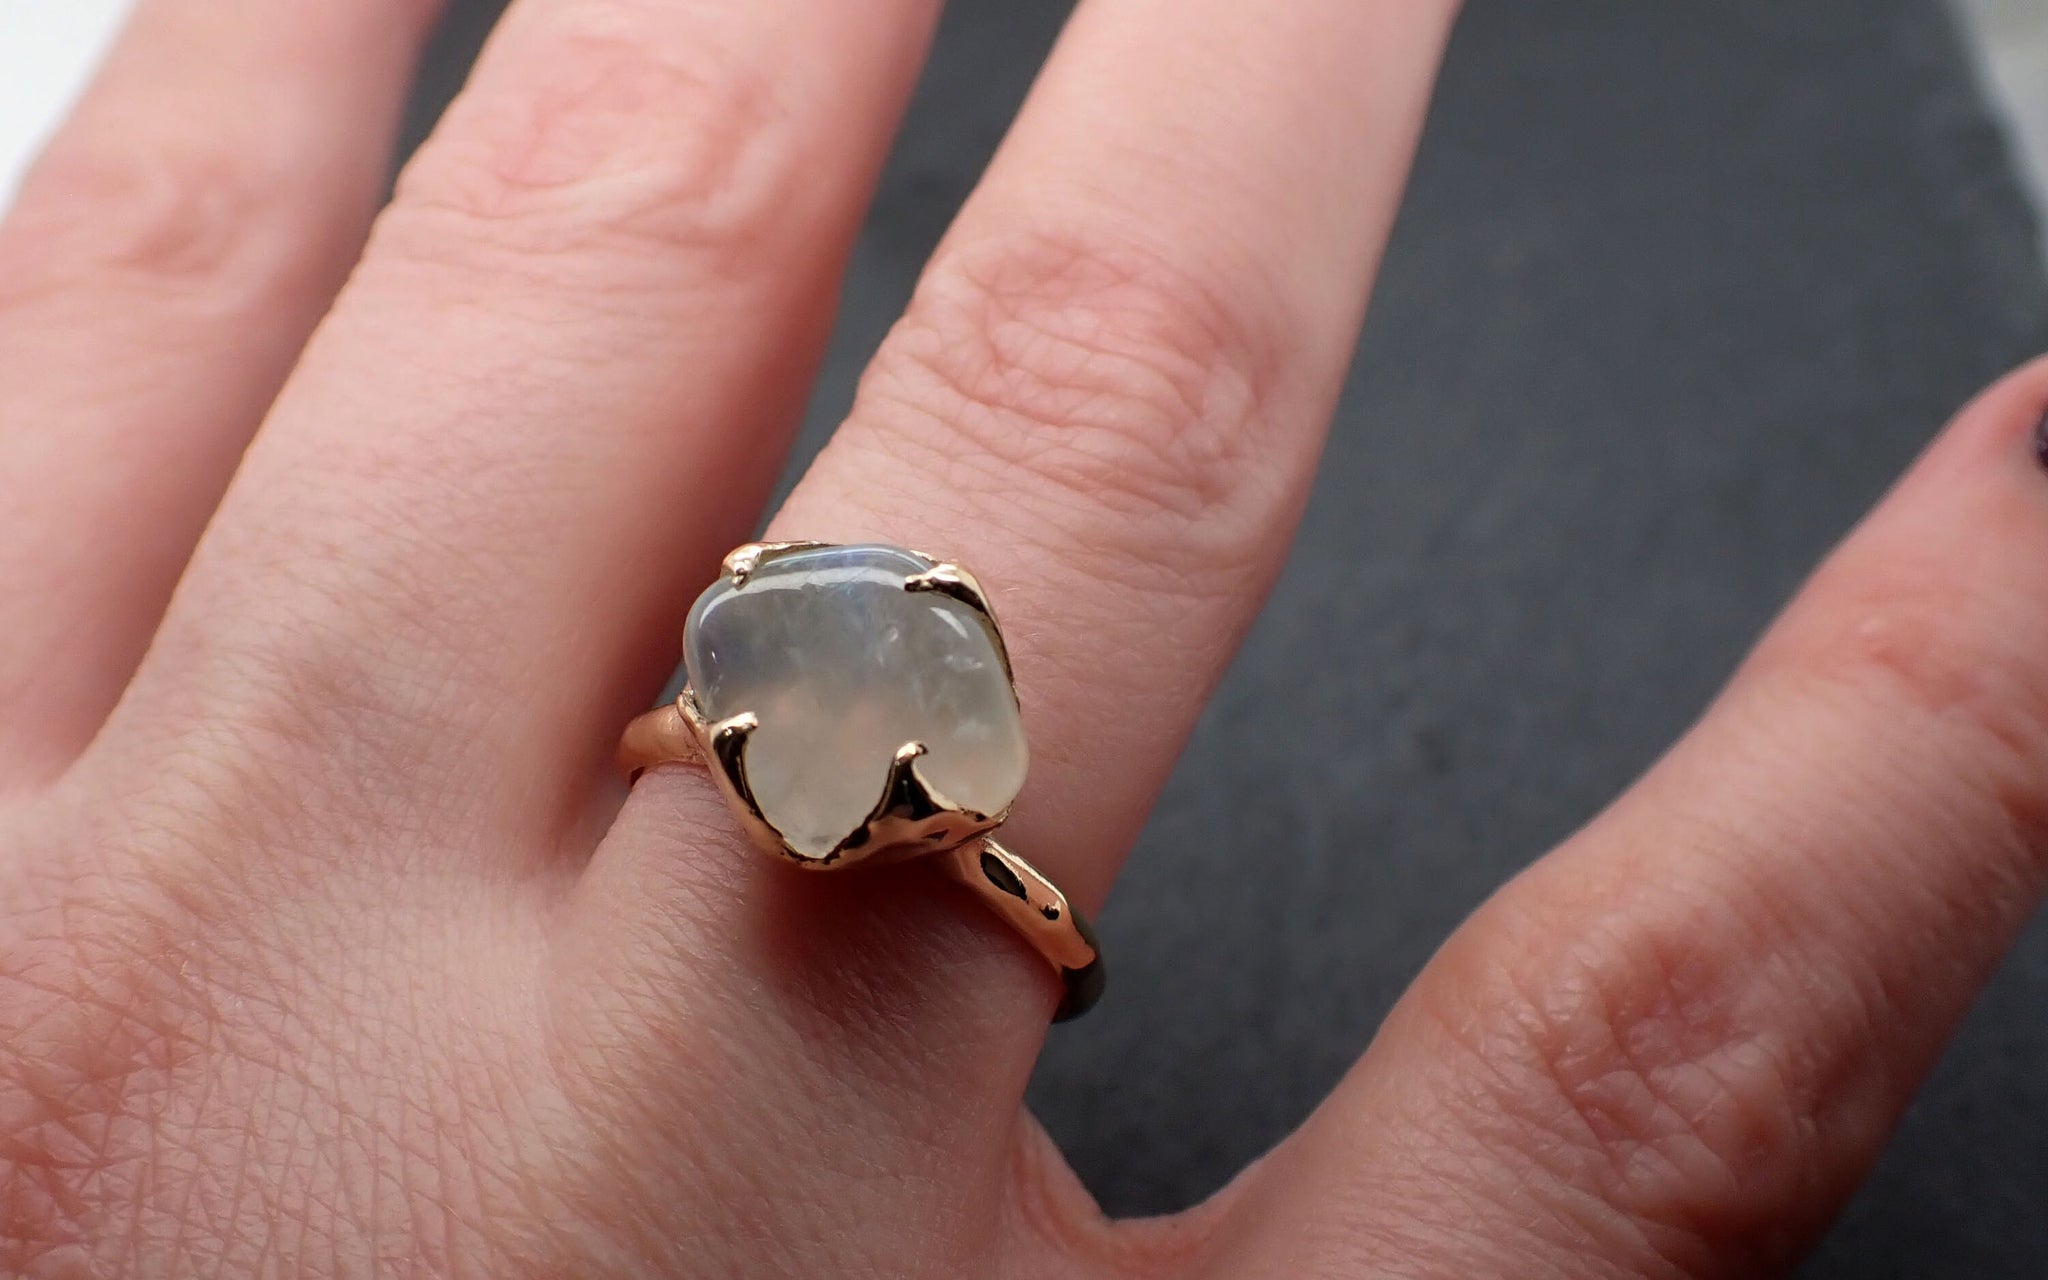 Moonstone Yellow 14k Gold Ring Gemstone Solitaire recycled tumbled statement cocktail 3361